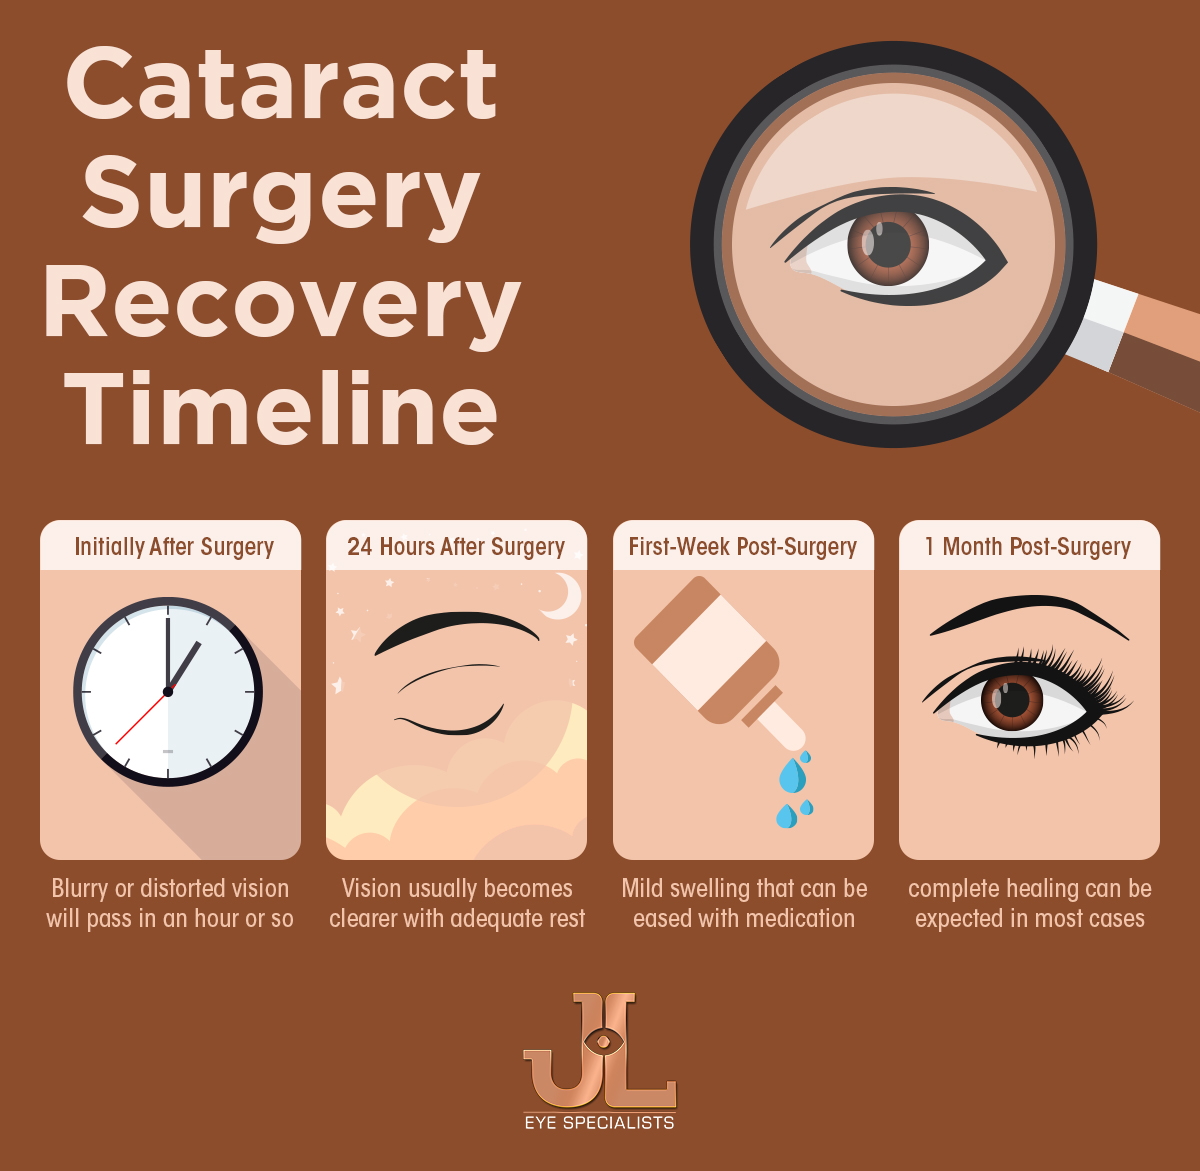 Cataract Surgery Recovery Timeline